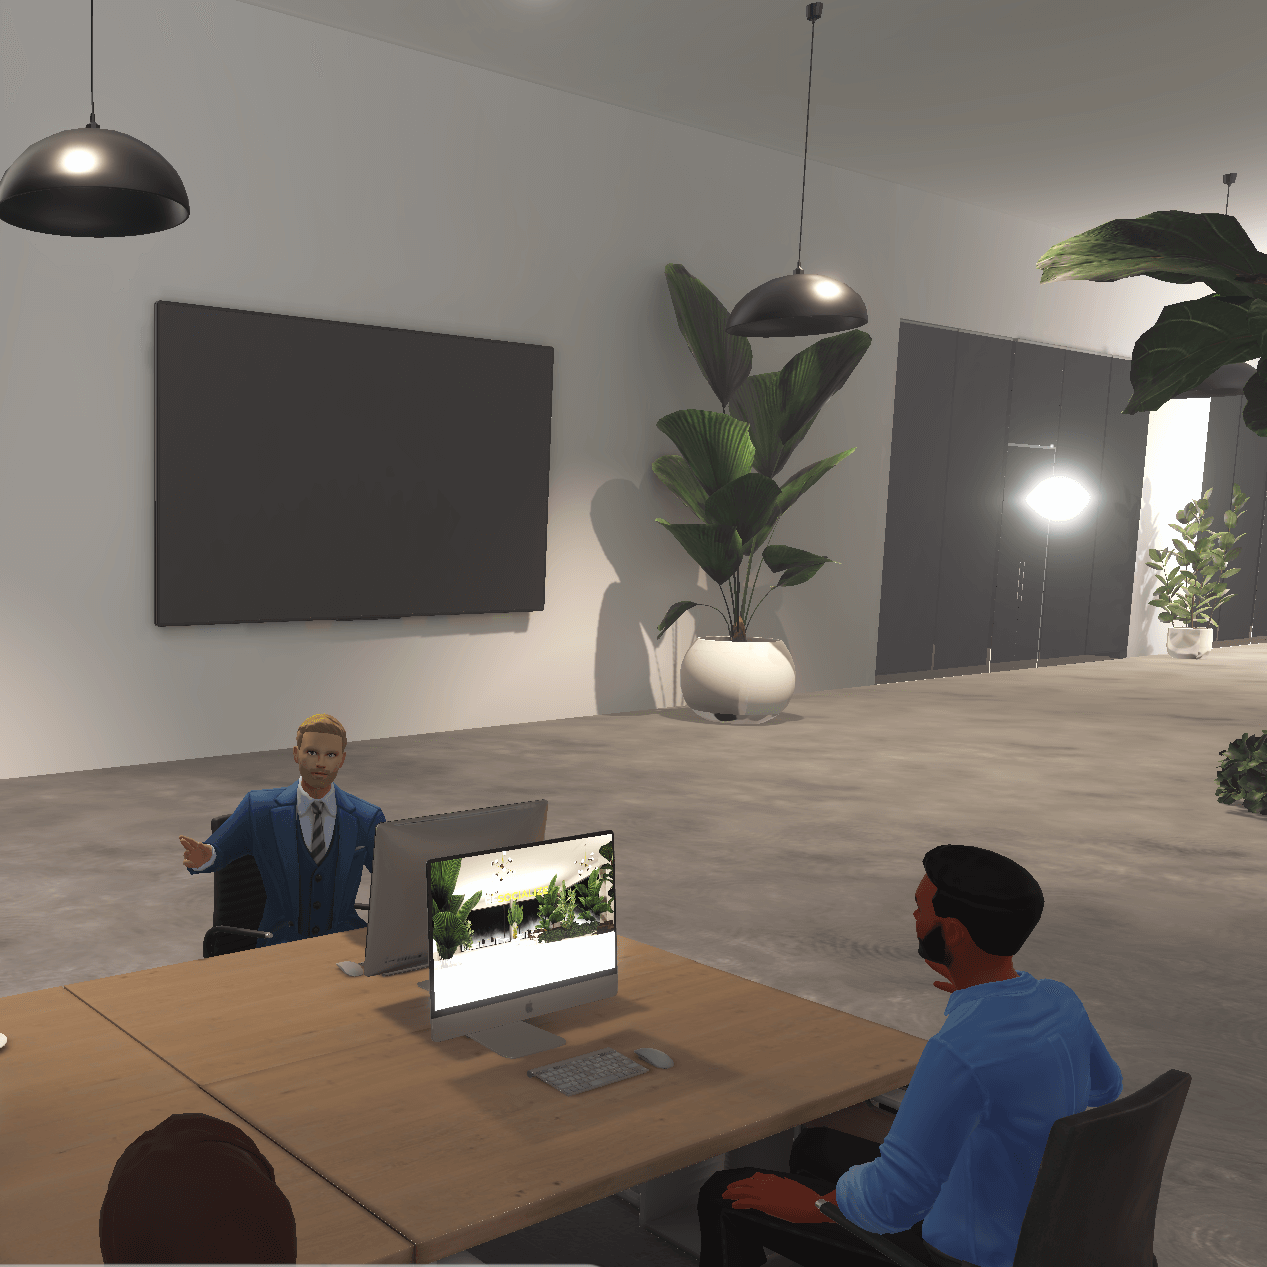 ReSocialize virtual office online metaverse meeting space with 4 avatars sitting around desks working remotely.